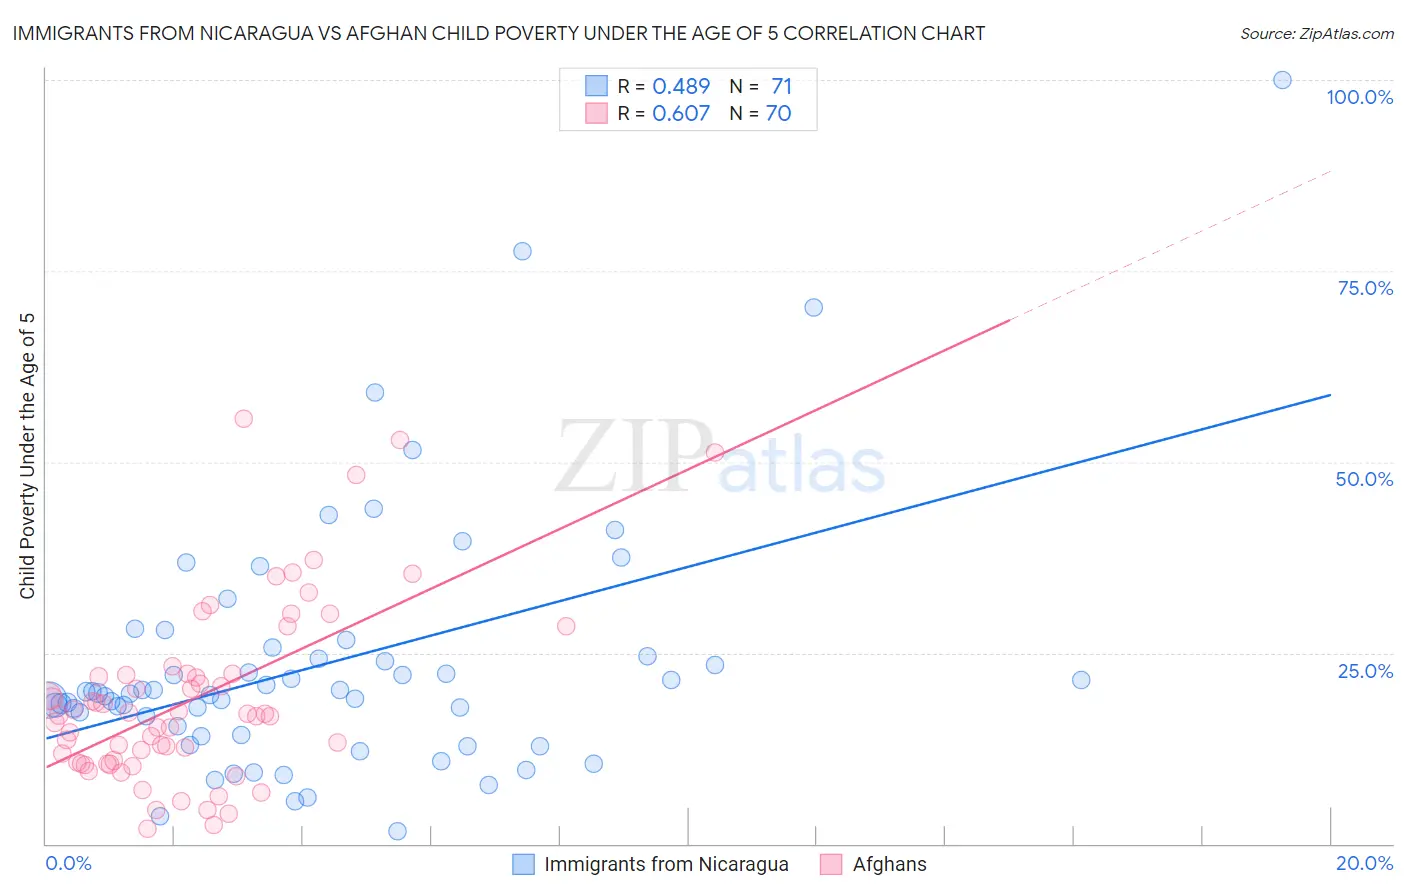 Immigrants from Nicaragua vs Afghan Child Poverty Under the Age of 5